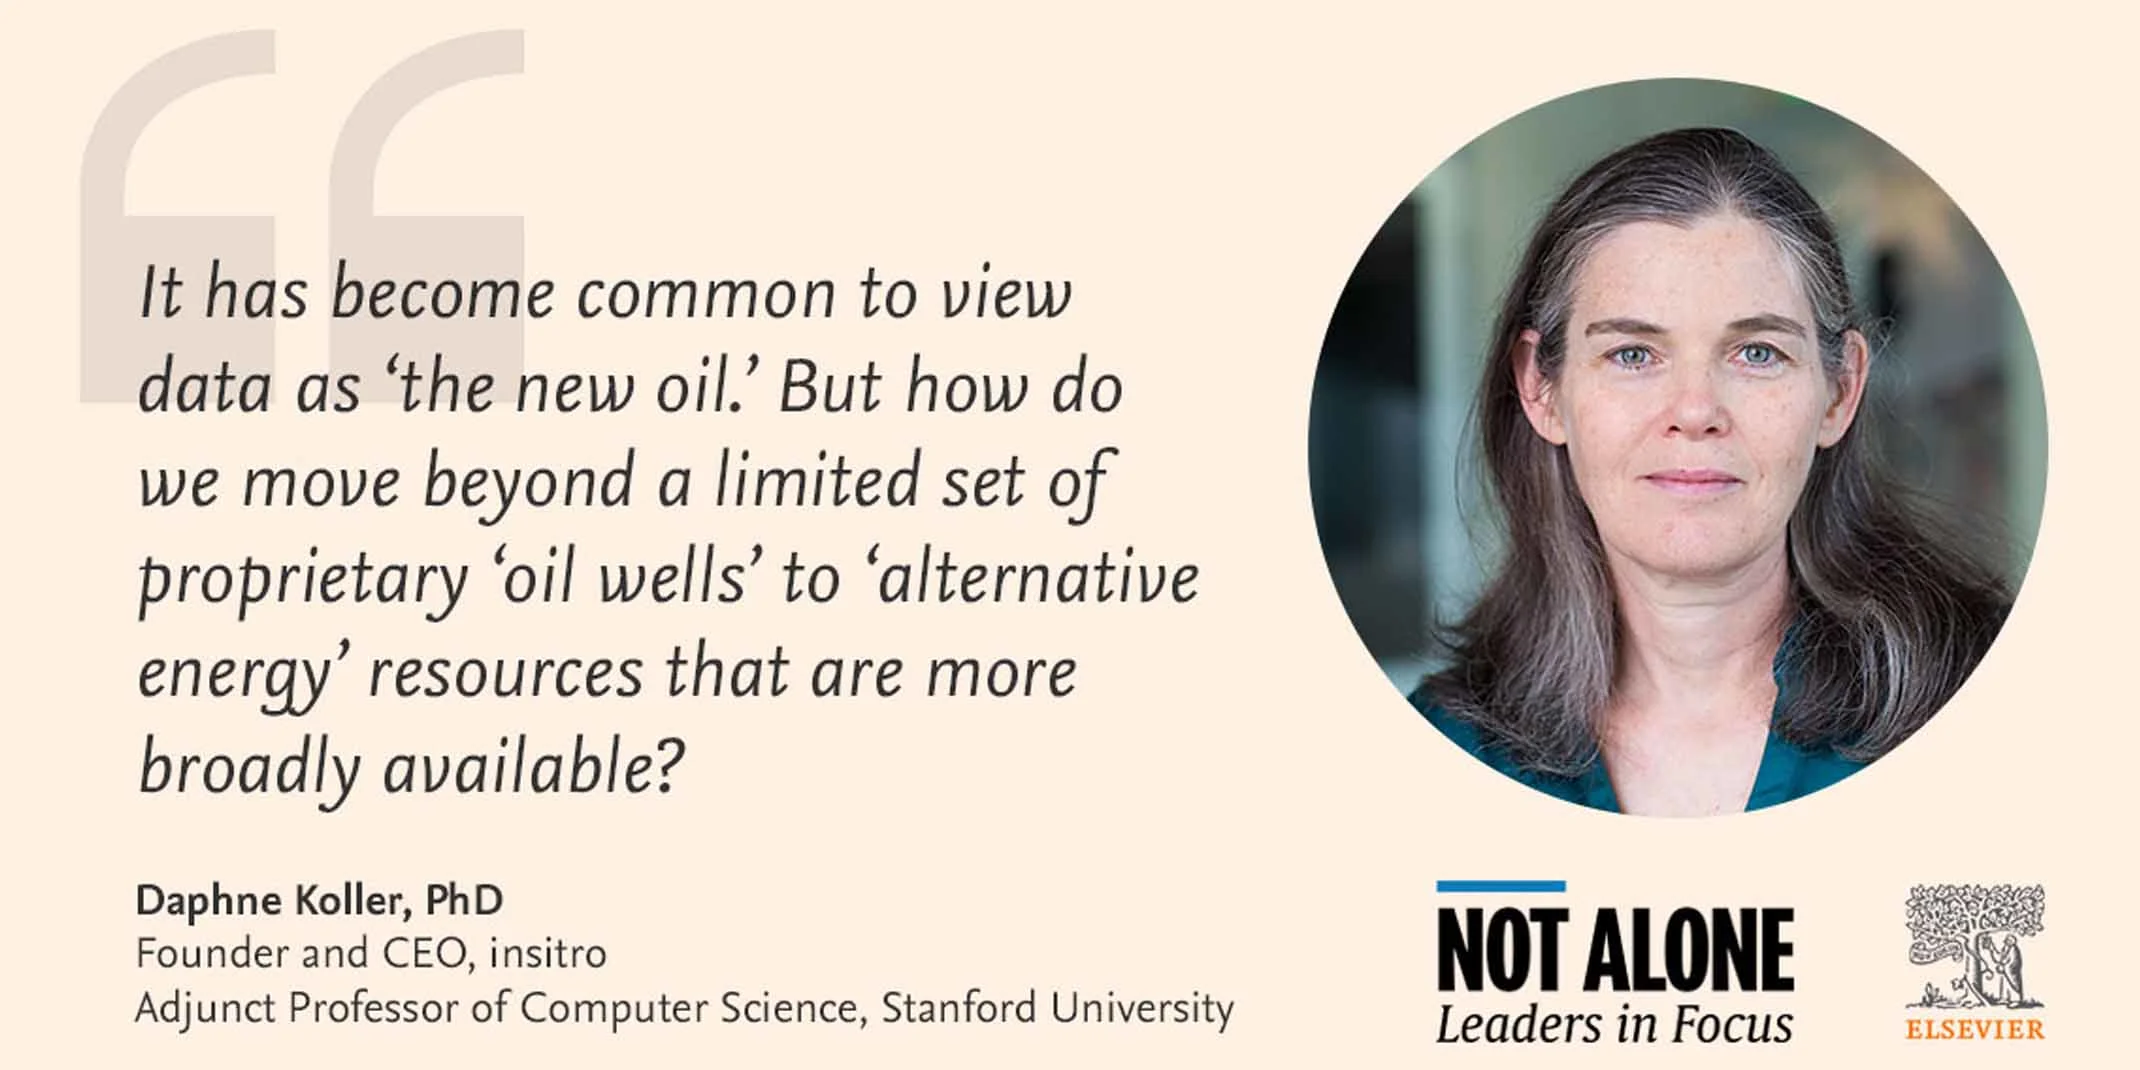 It has become common to view data as the new oil. But how do we move beyond a limited set pf proprietary oil wells to alternative energy resources that are more readily available. 